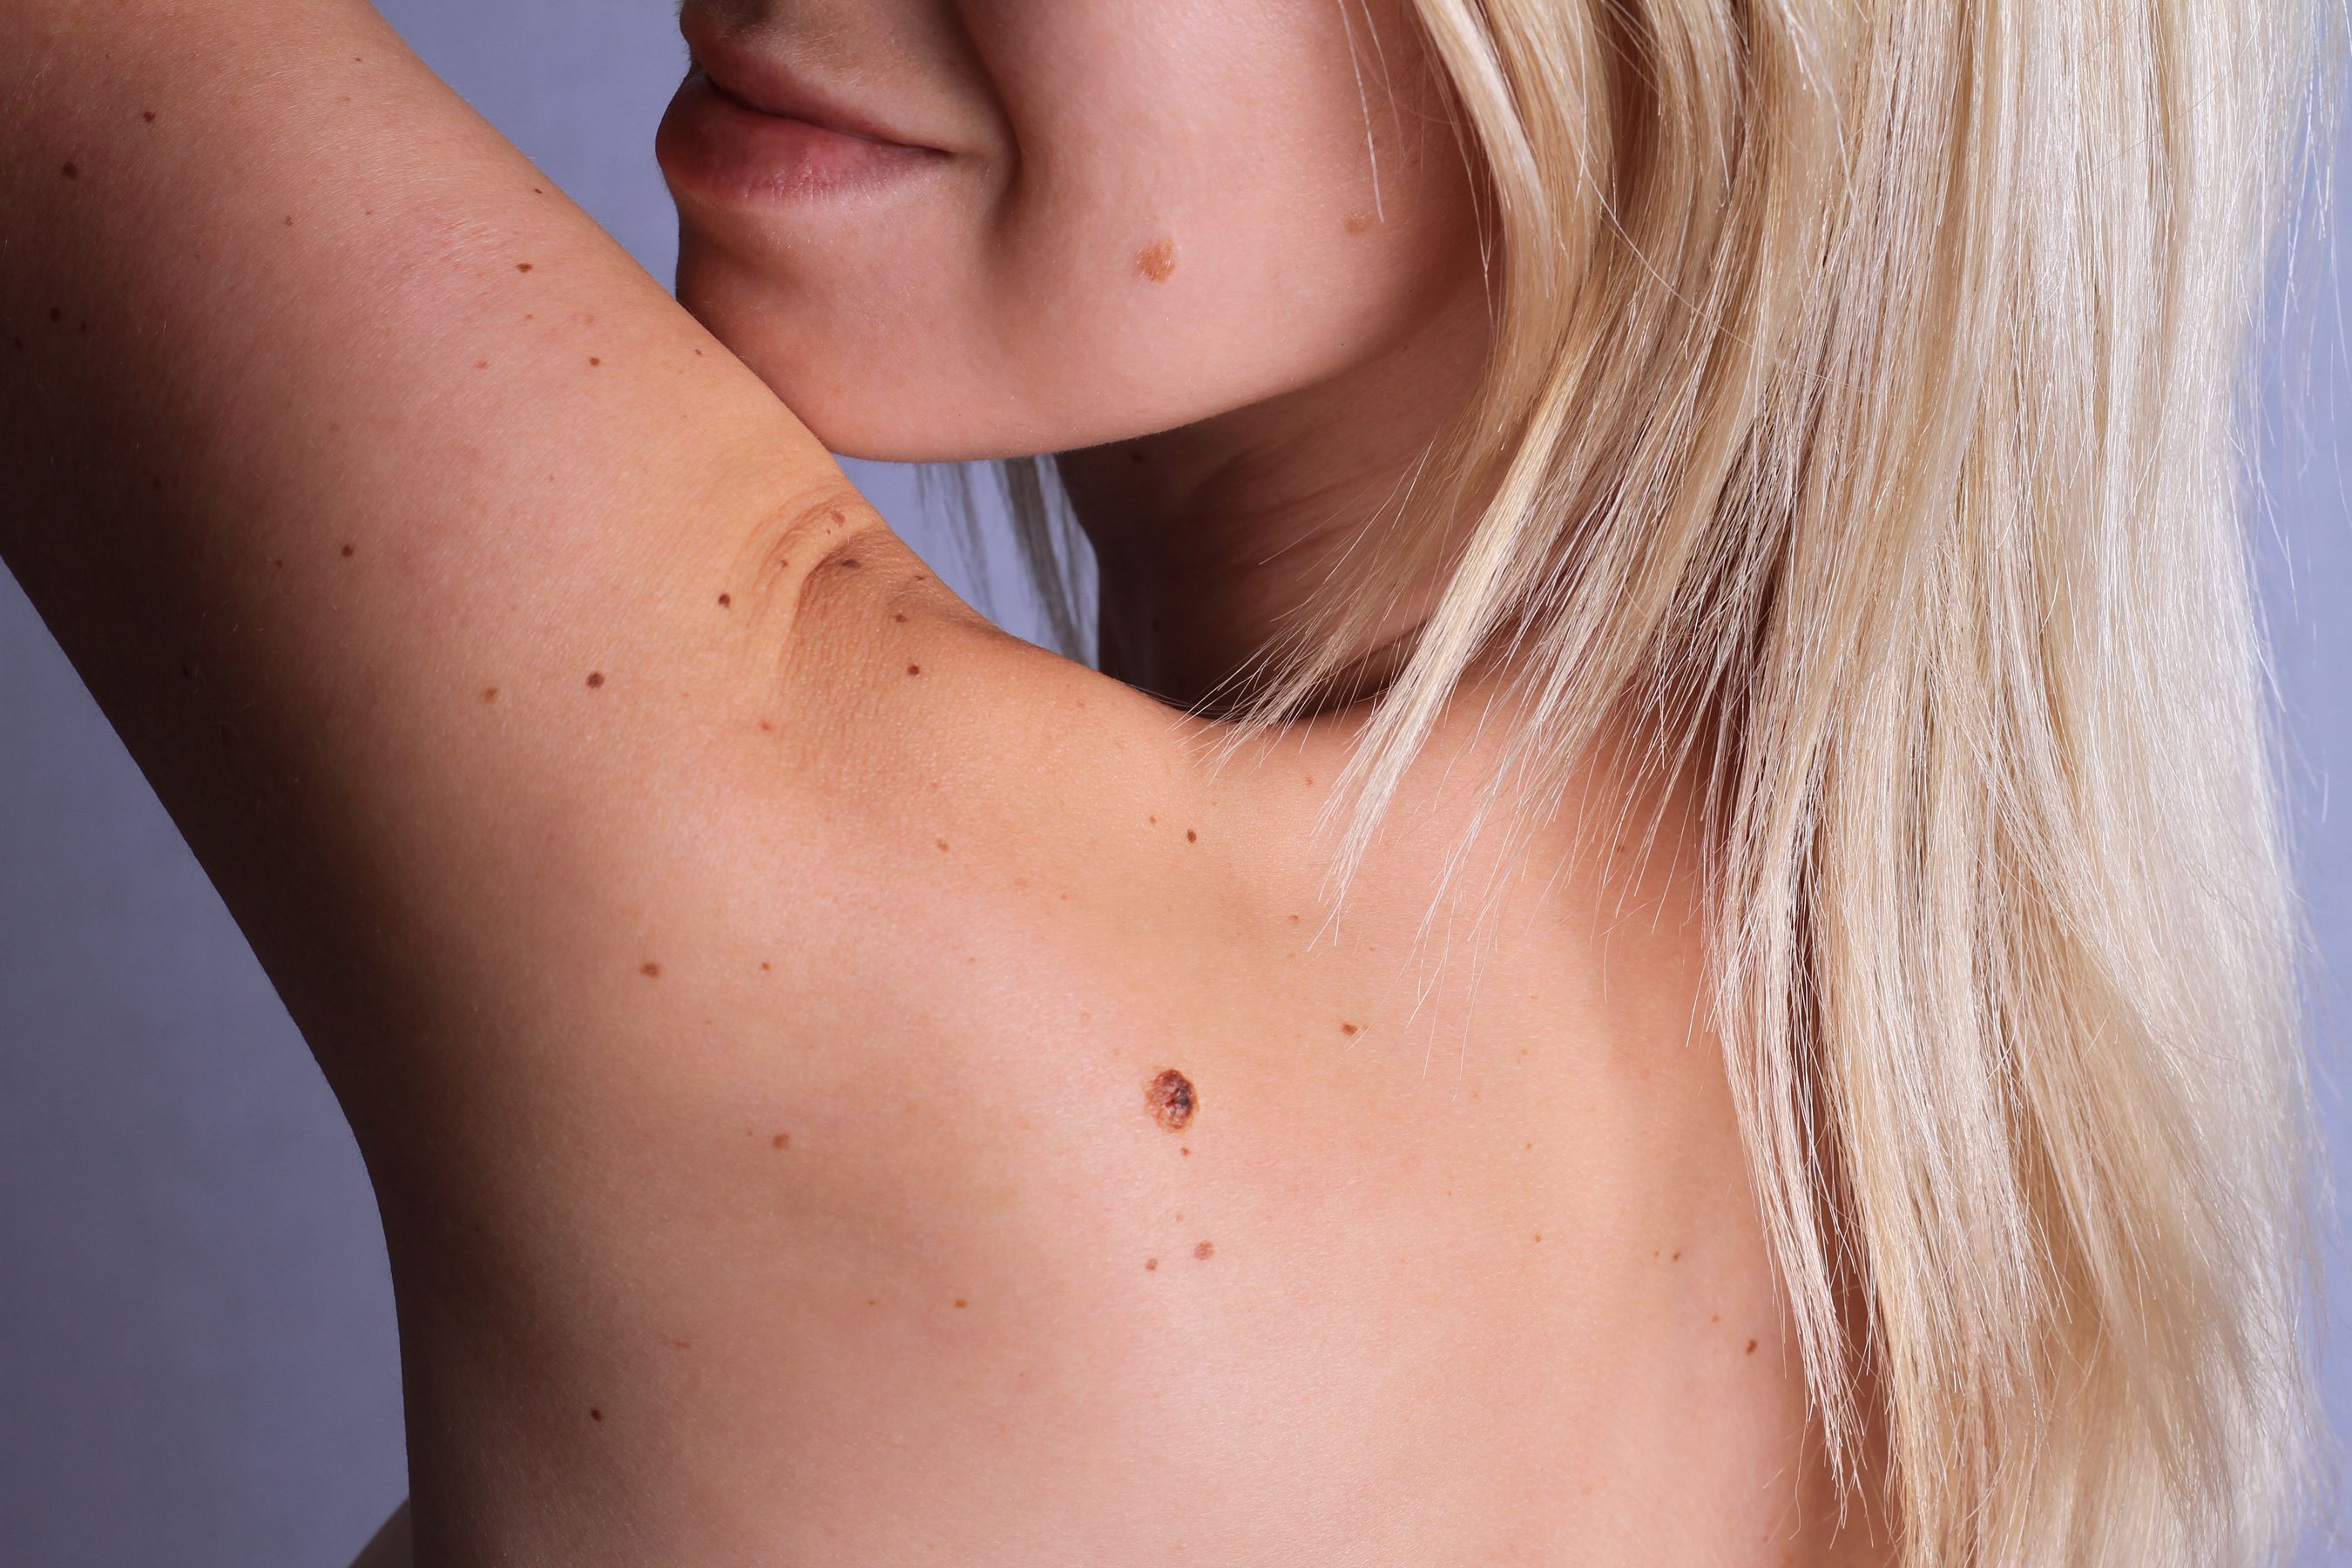 Melanoma Pictures & Symptoms - What Does Melanoma Look Like?